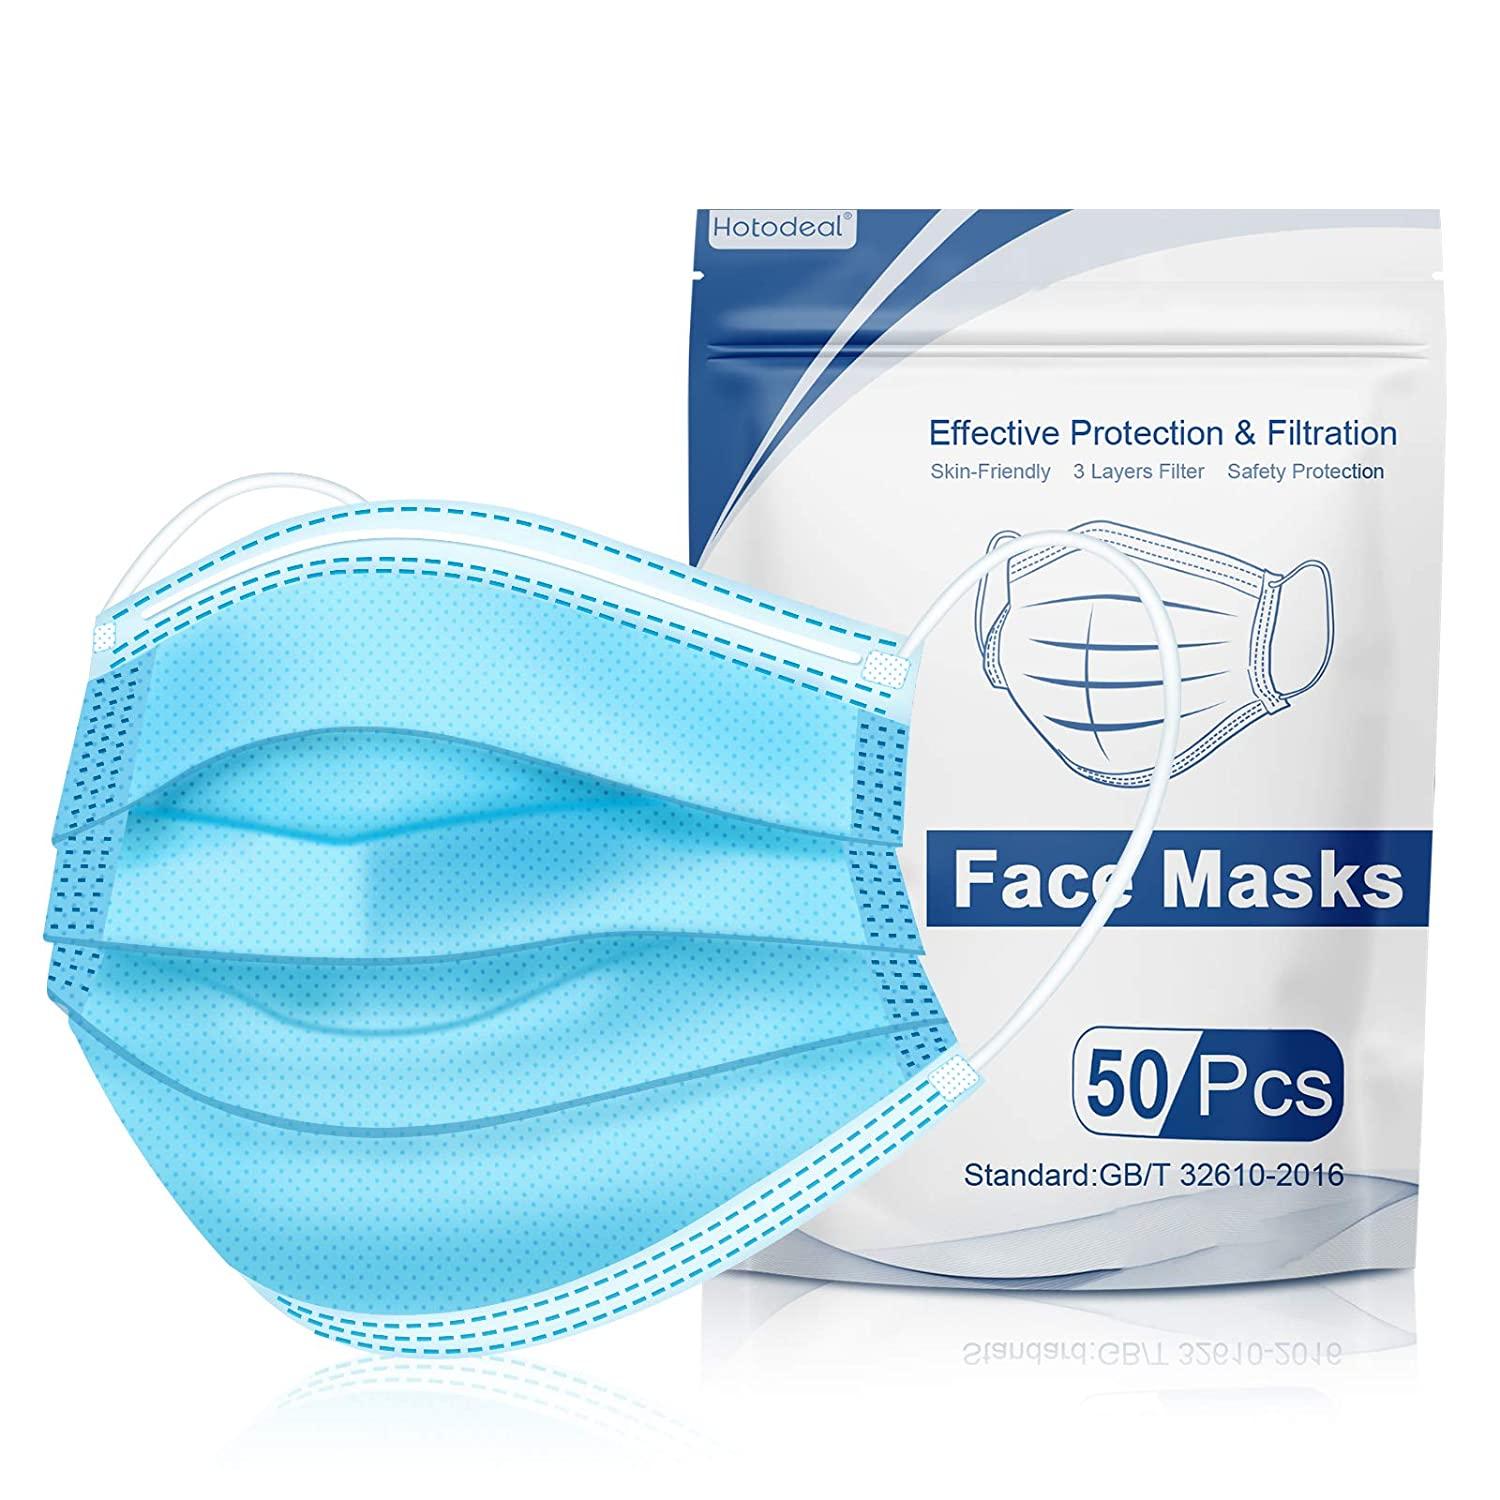 50 Hotodeal 3-Ply Disposable Face Masks for $4.50